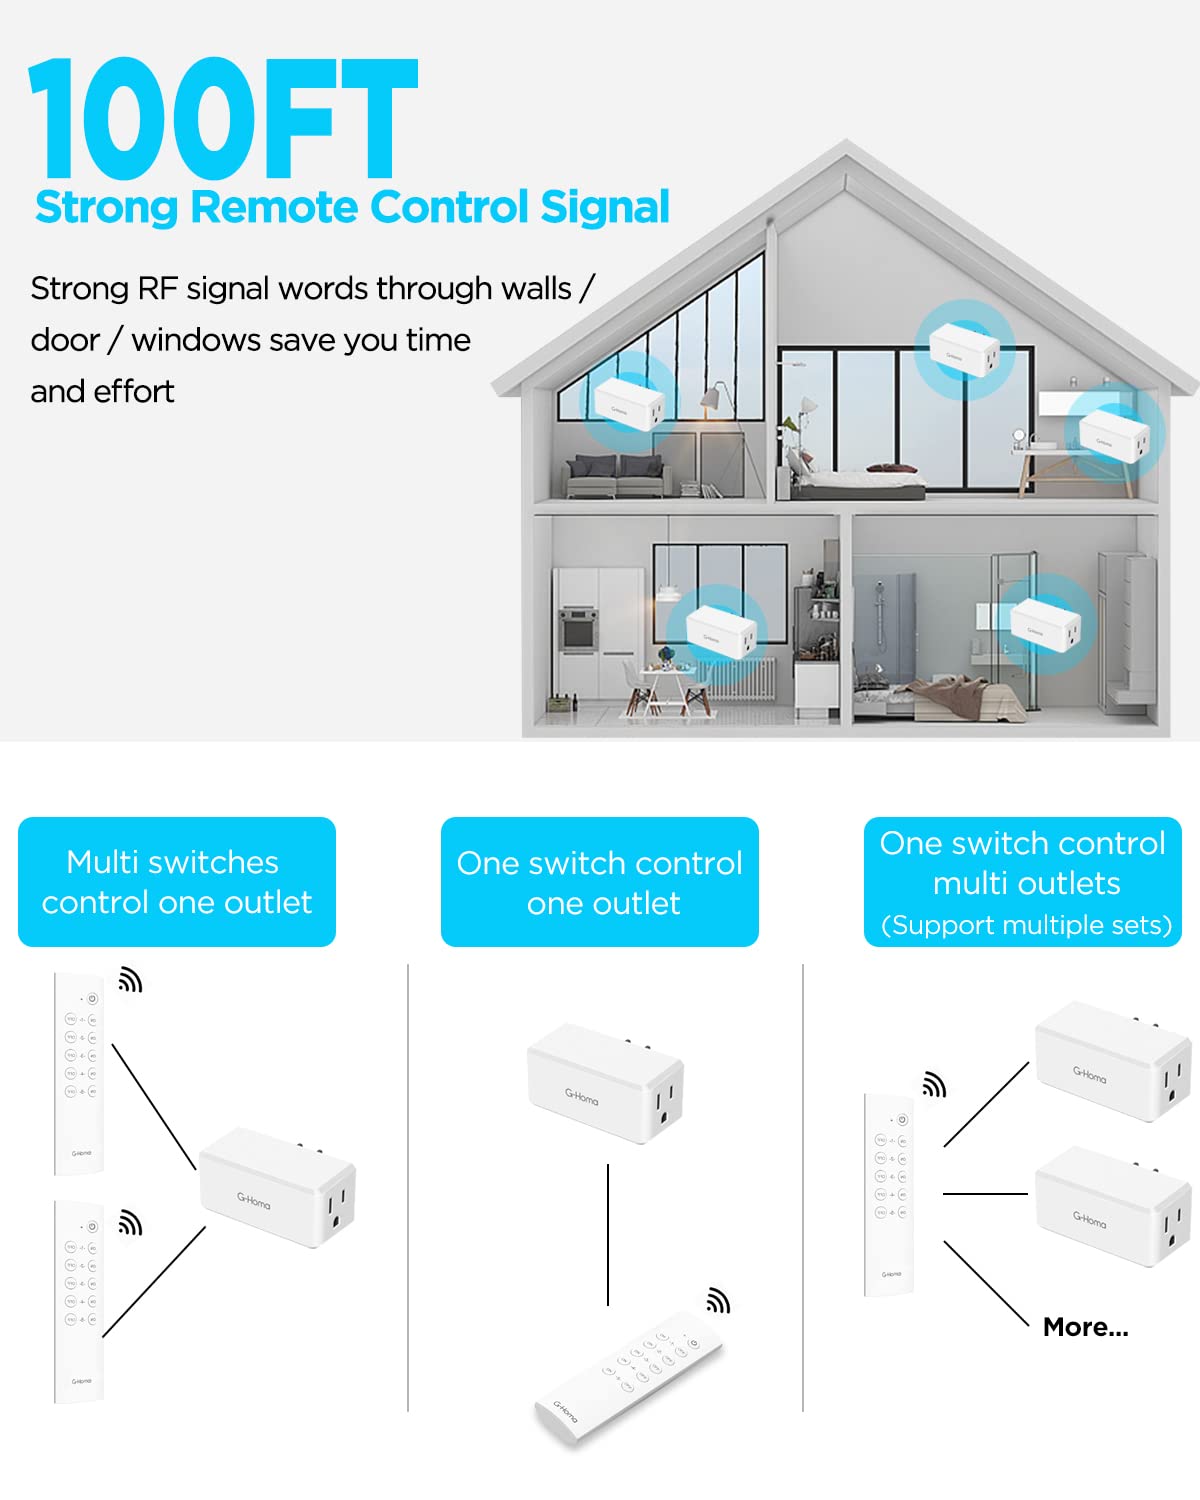 HAPYTHDA Remote Control Outlet,15A/1500W, 500 Feet RF Range Remote Light  Switches Kit, No Wiring Needed Wireless Remote Outlet for Light, Small  Electrical Appliance, with Anti-Surge 4000V 